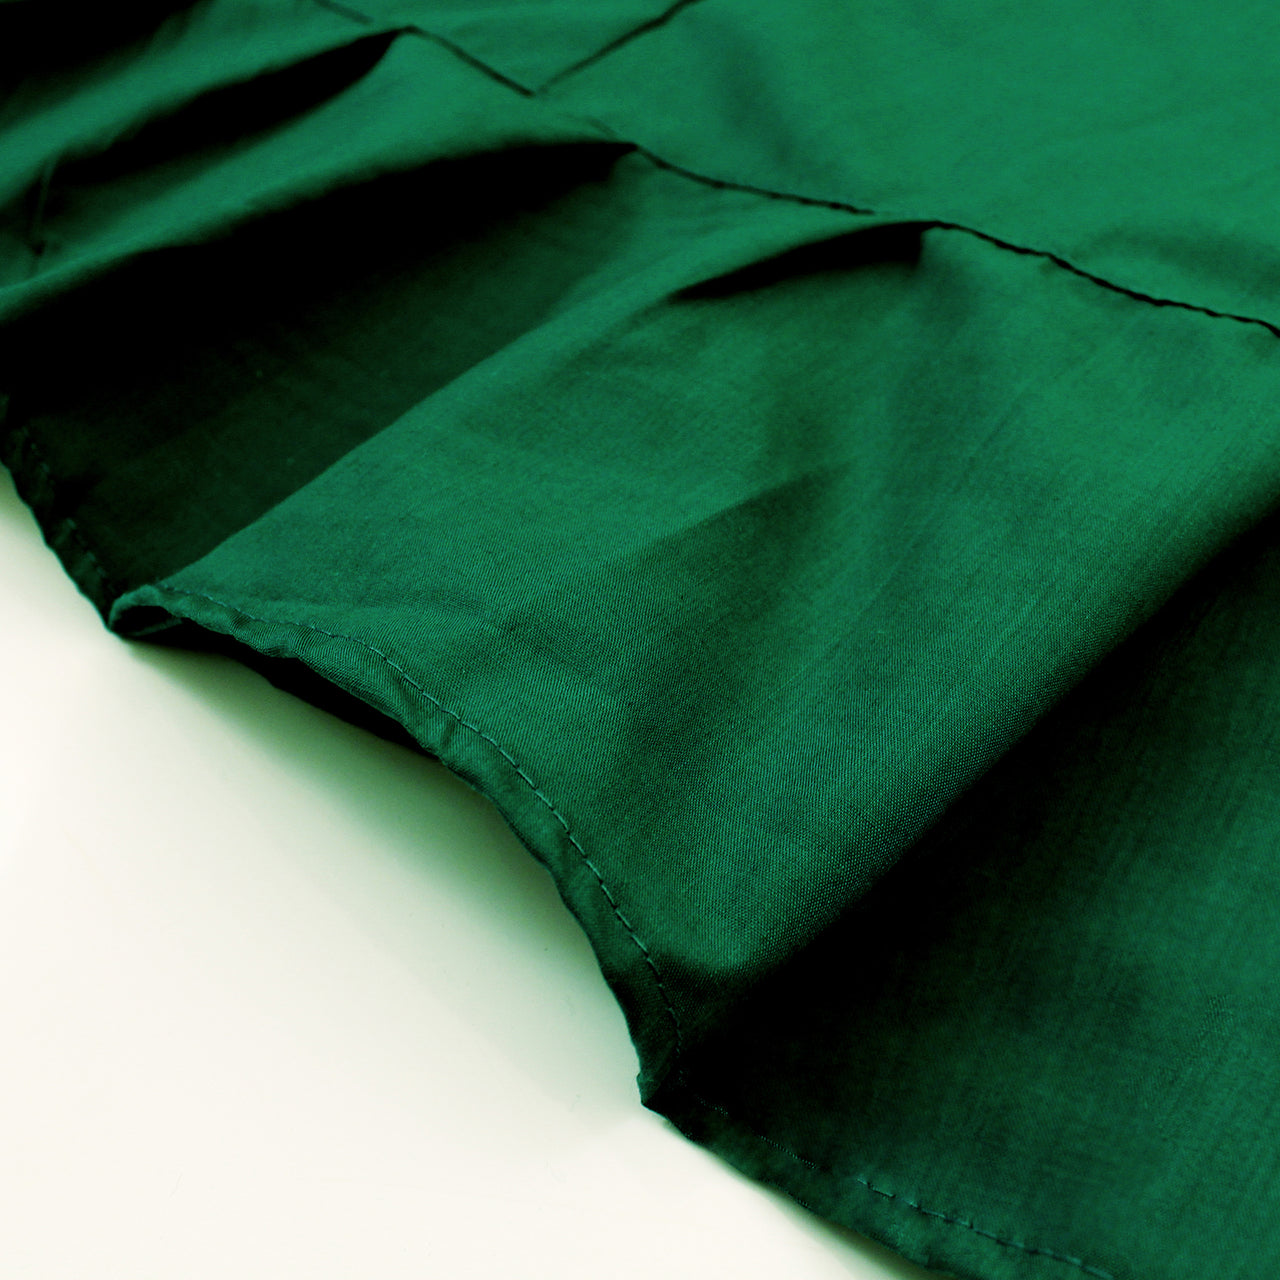 Bottle Green - Sari (Saree) Petticoat - Available in S, M, L & XL - Underskirts For Sari's